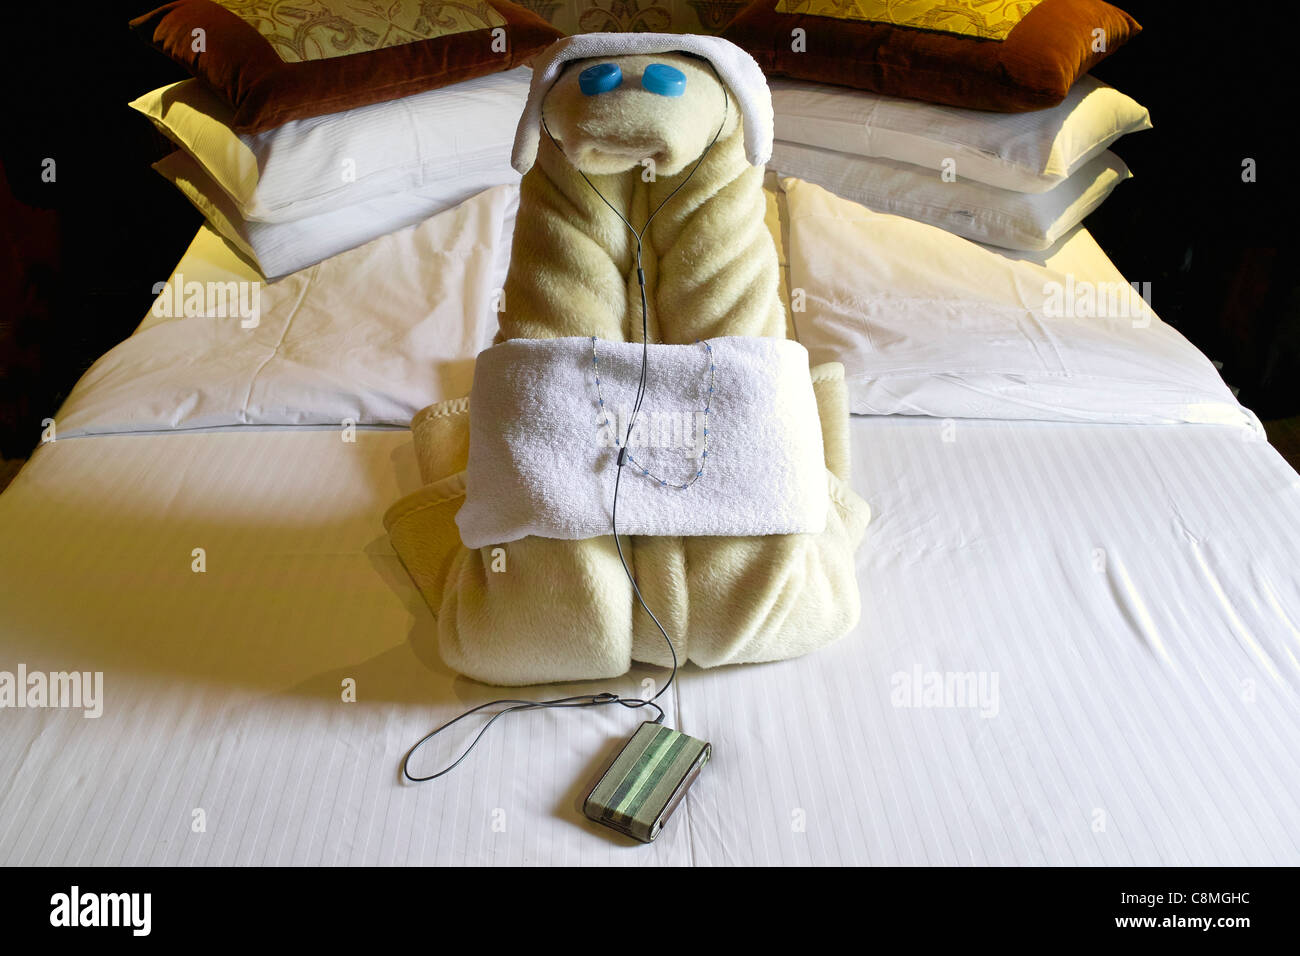 Folded towels making a snake with blue bottle top eyes, wearing headphones, necklace and an mp3 player, arranged on a hotel bed Stock Photo